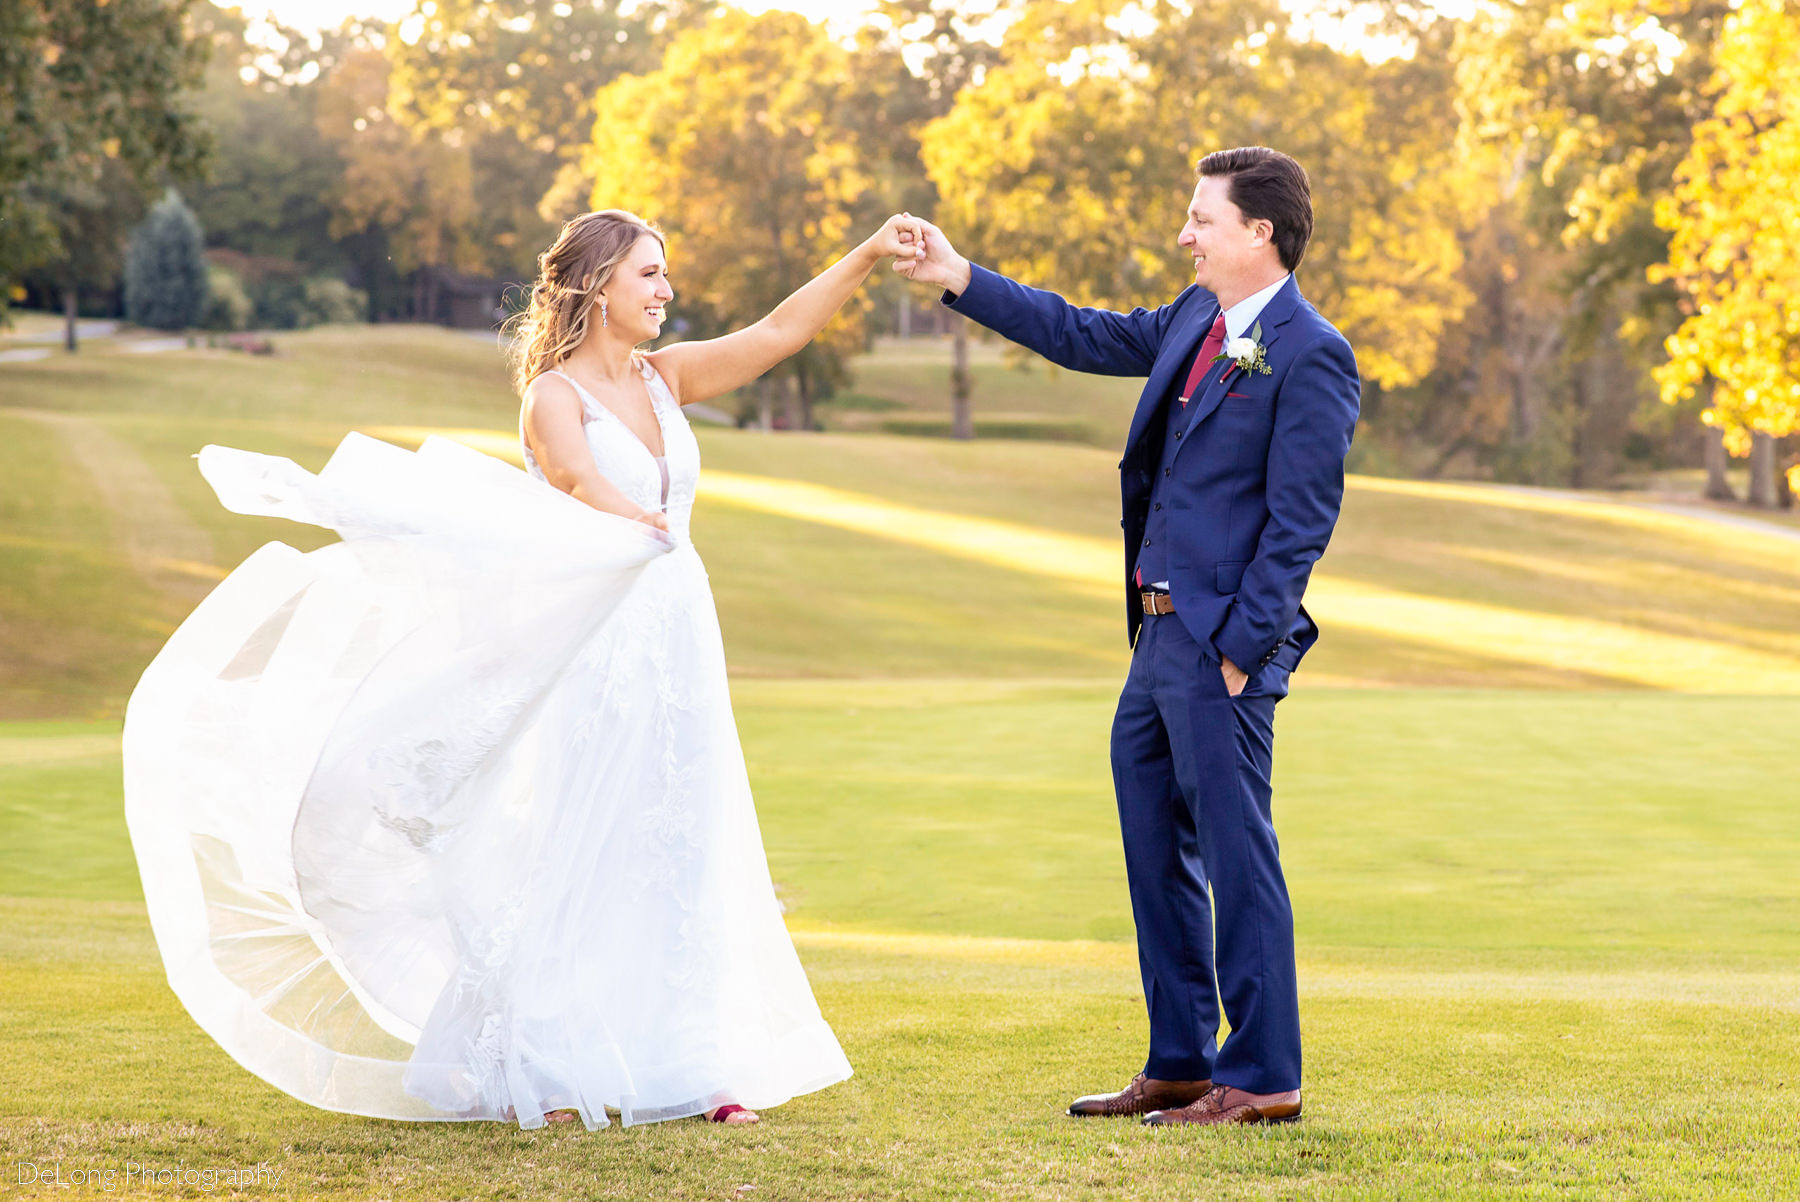 Bride and groom dancing on the gold course with beautiful yellow autumn leaves at Pine Island Country Club in Charlotte, NC by Charlotte wedding Photographers DeLong Photography